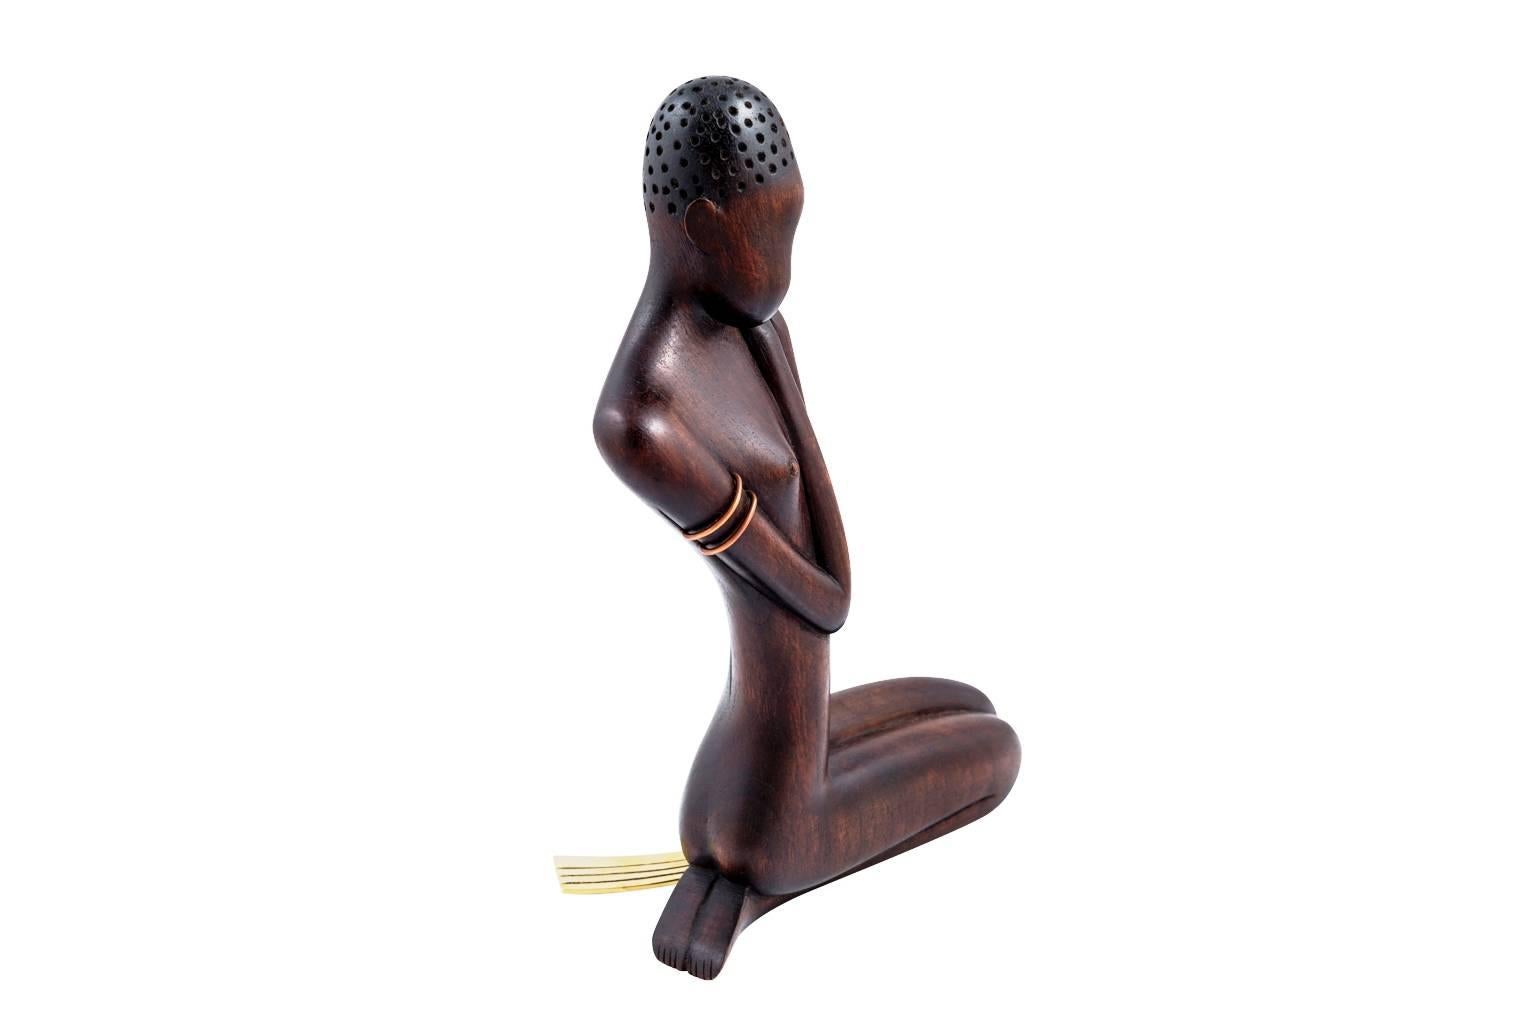 Starting in the 1930s, the Werkstätte Hagenauer produced objects with African backgrounds. In the 1950s, these objects experienced a revival and for the first time, male African sculptures were displayed and the product range of animals was widened.